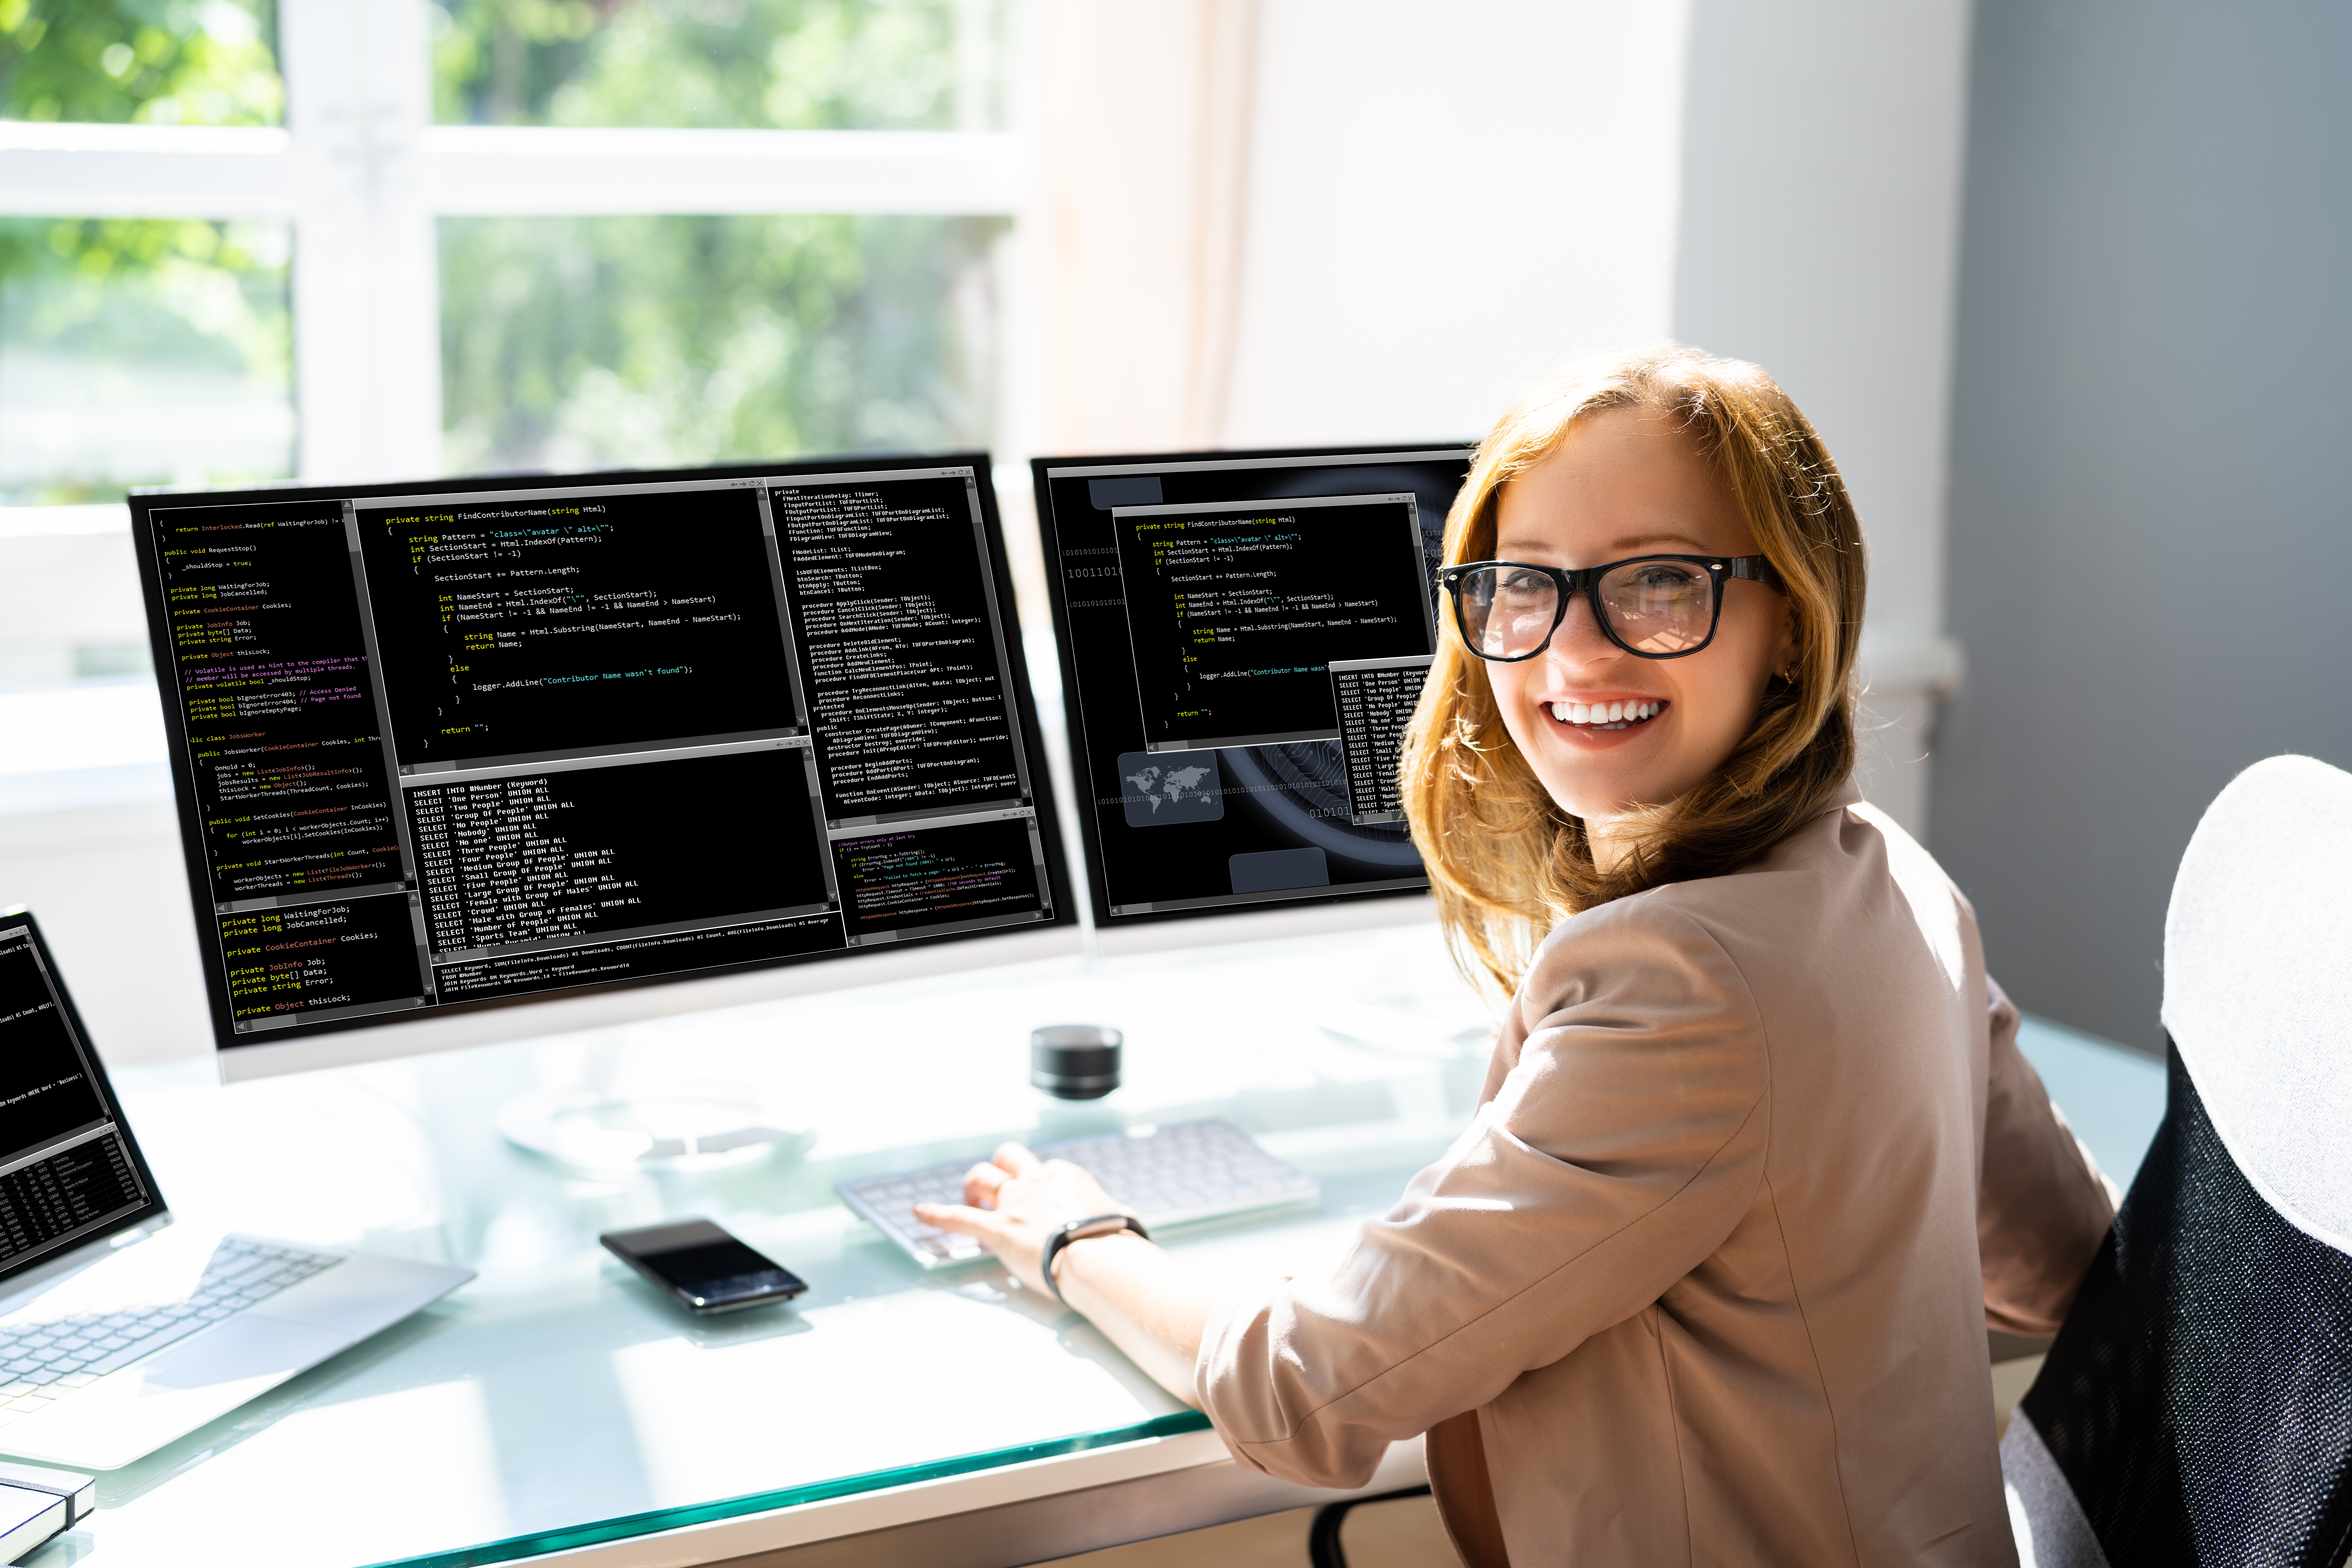 Female programmer smiling in front of two computer monitors with code